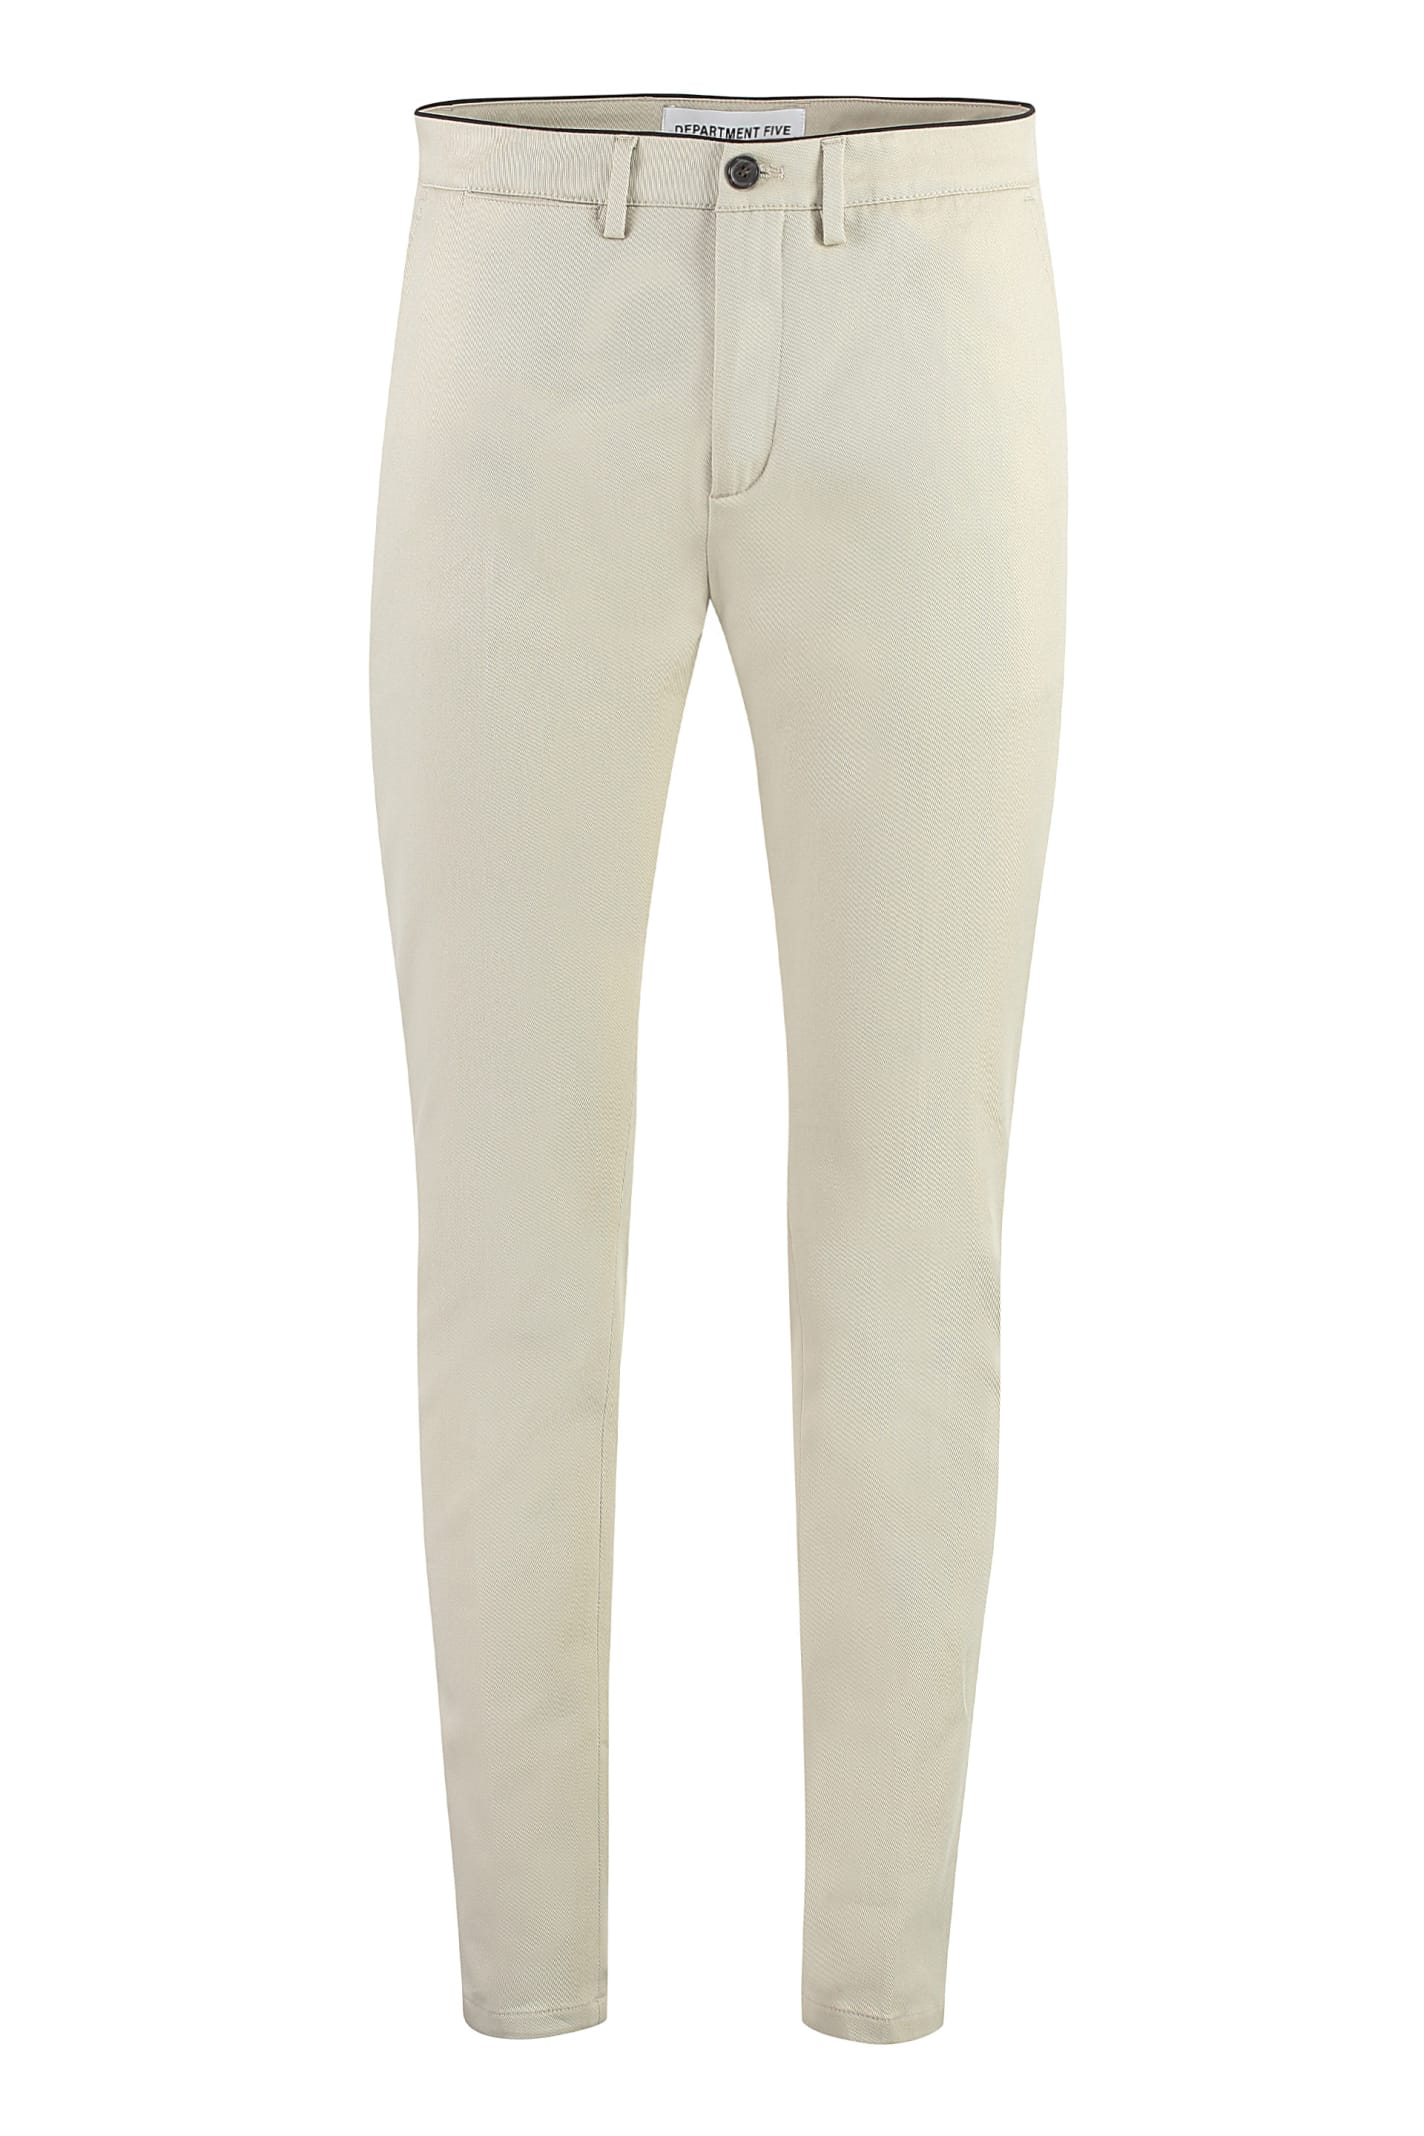 Department Five Mike Chino Trousers In Sand